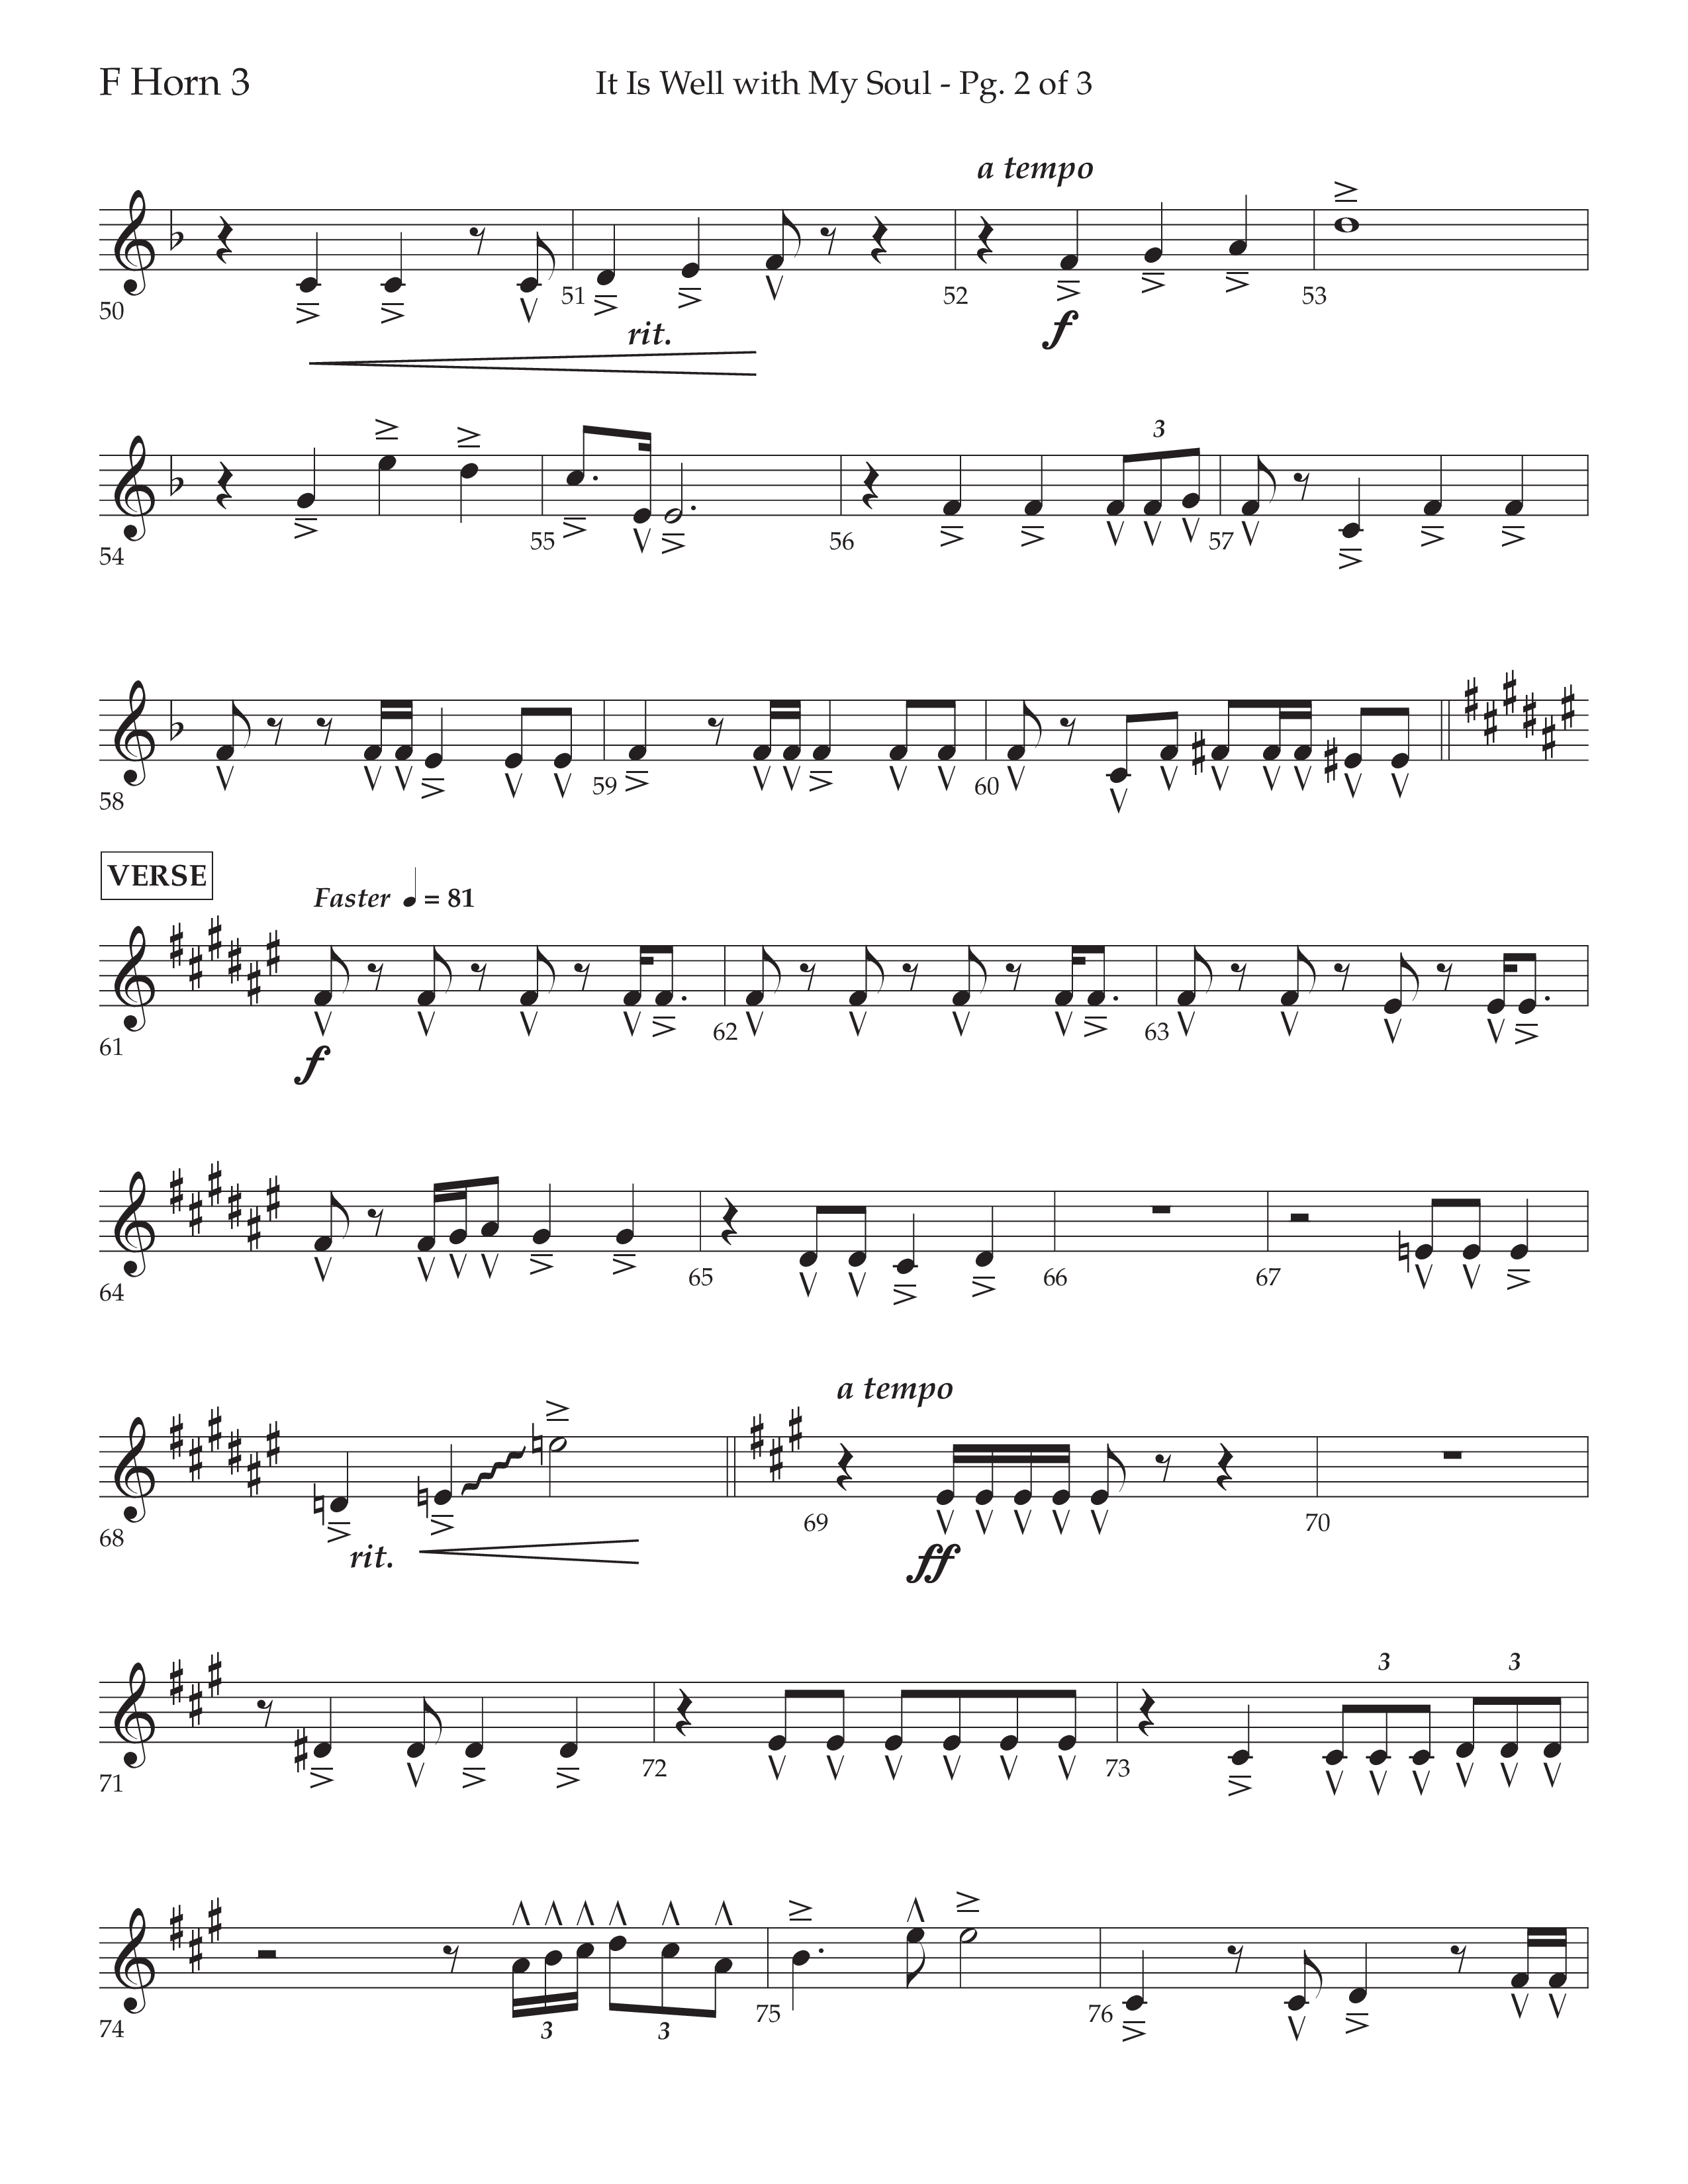 It Is Well With My Soul (Choral Anthem SATB) French Horn 3 (Lifeway Choral / Arr. John Bolin / Orch. David Clydesdale)